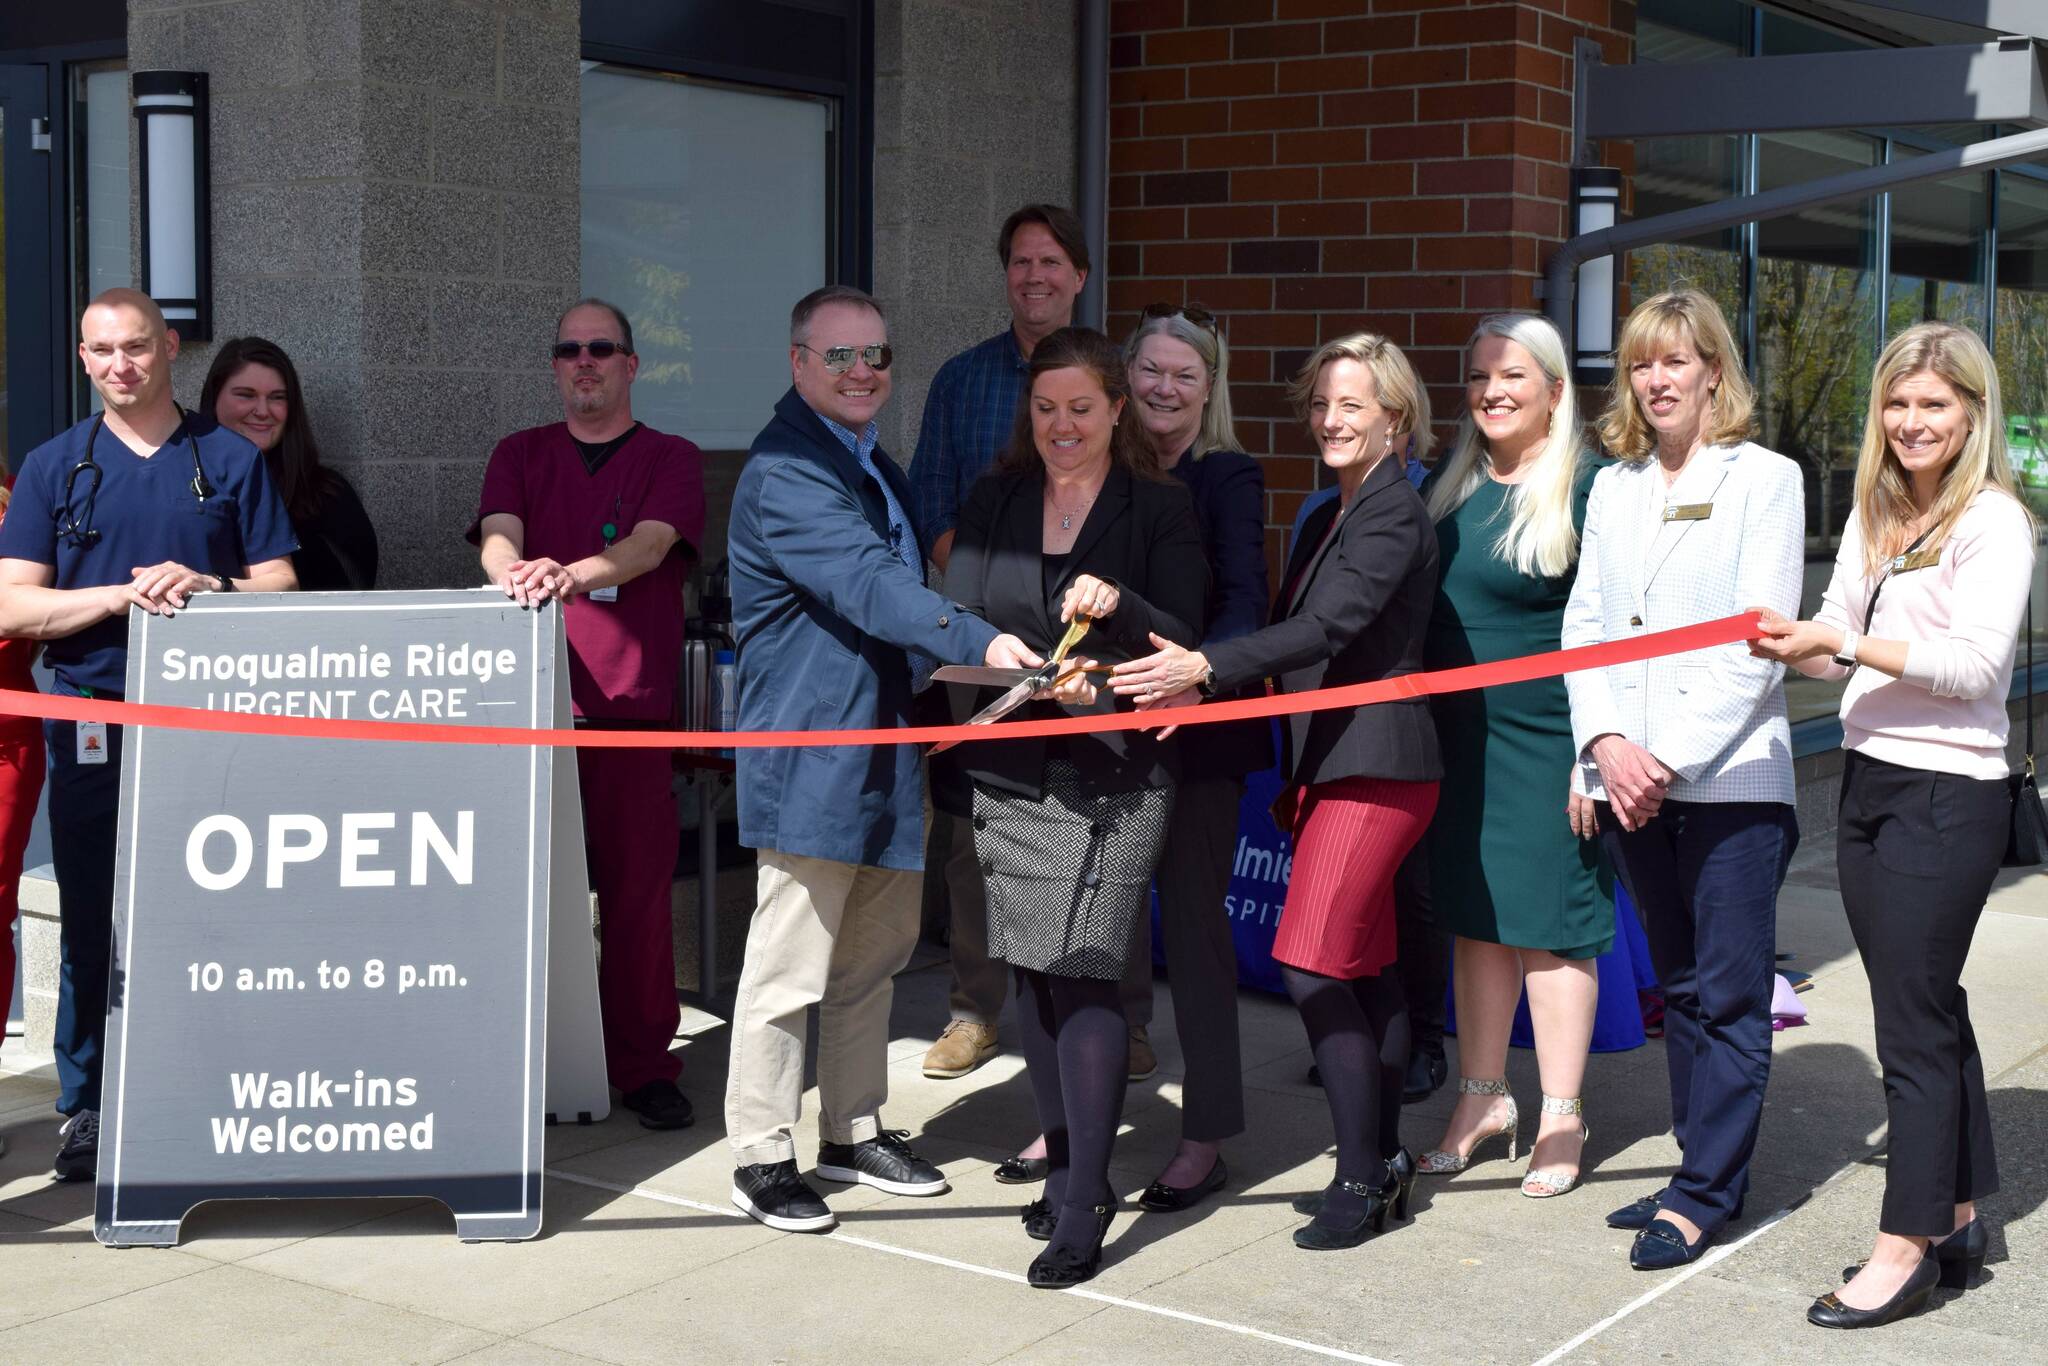 Snoqualmie Valley Hospital CEO Renee Jensen (center) is joined by hospital staff and Snoqualmie elected officials to celebrate the opening of the Snoqualmie Ridge Urgent Care on May 4. Photo Conor Wilson/Valley Record.